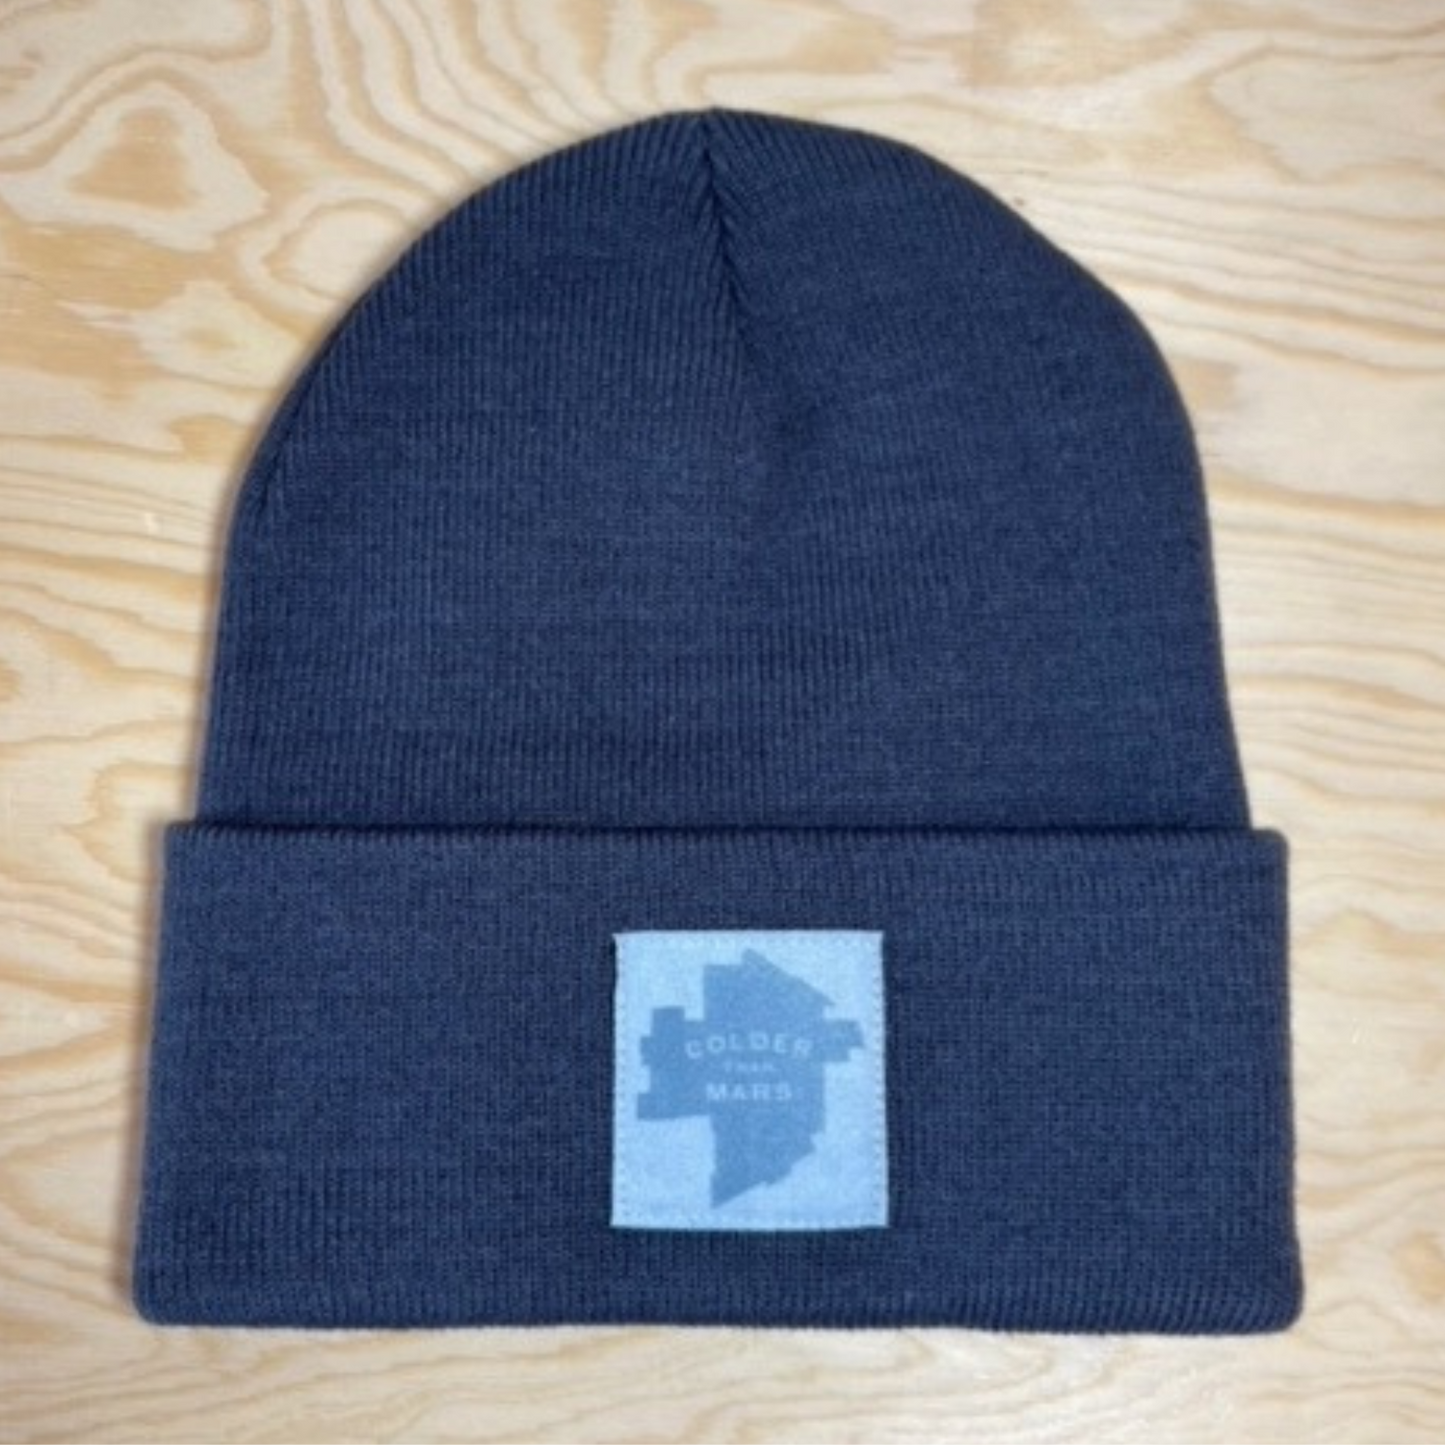 Colder Than Mars Toque | Ice Blue on Charcoal